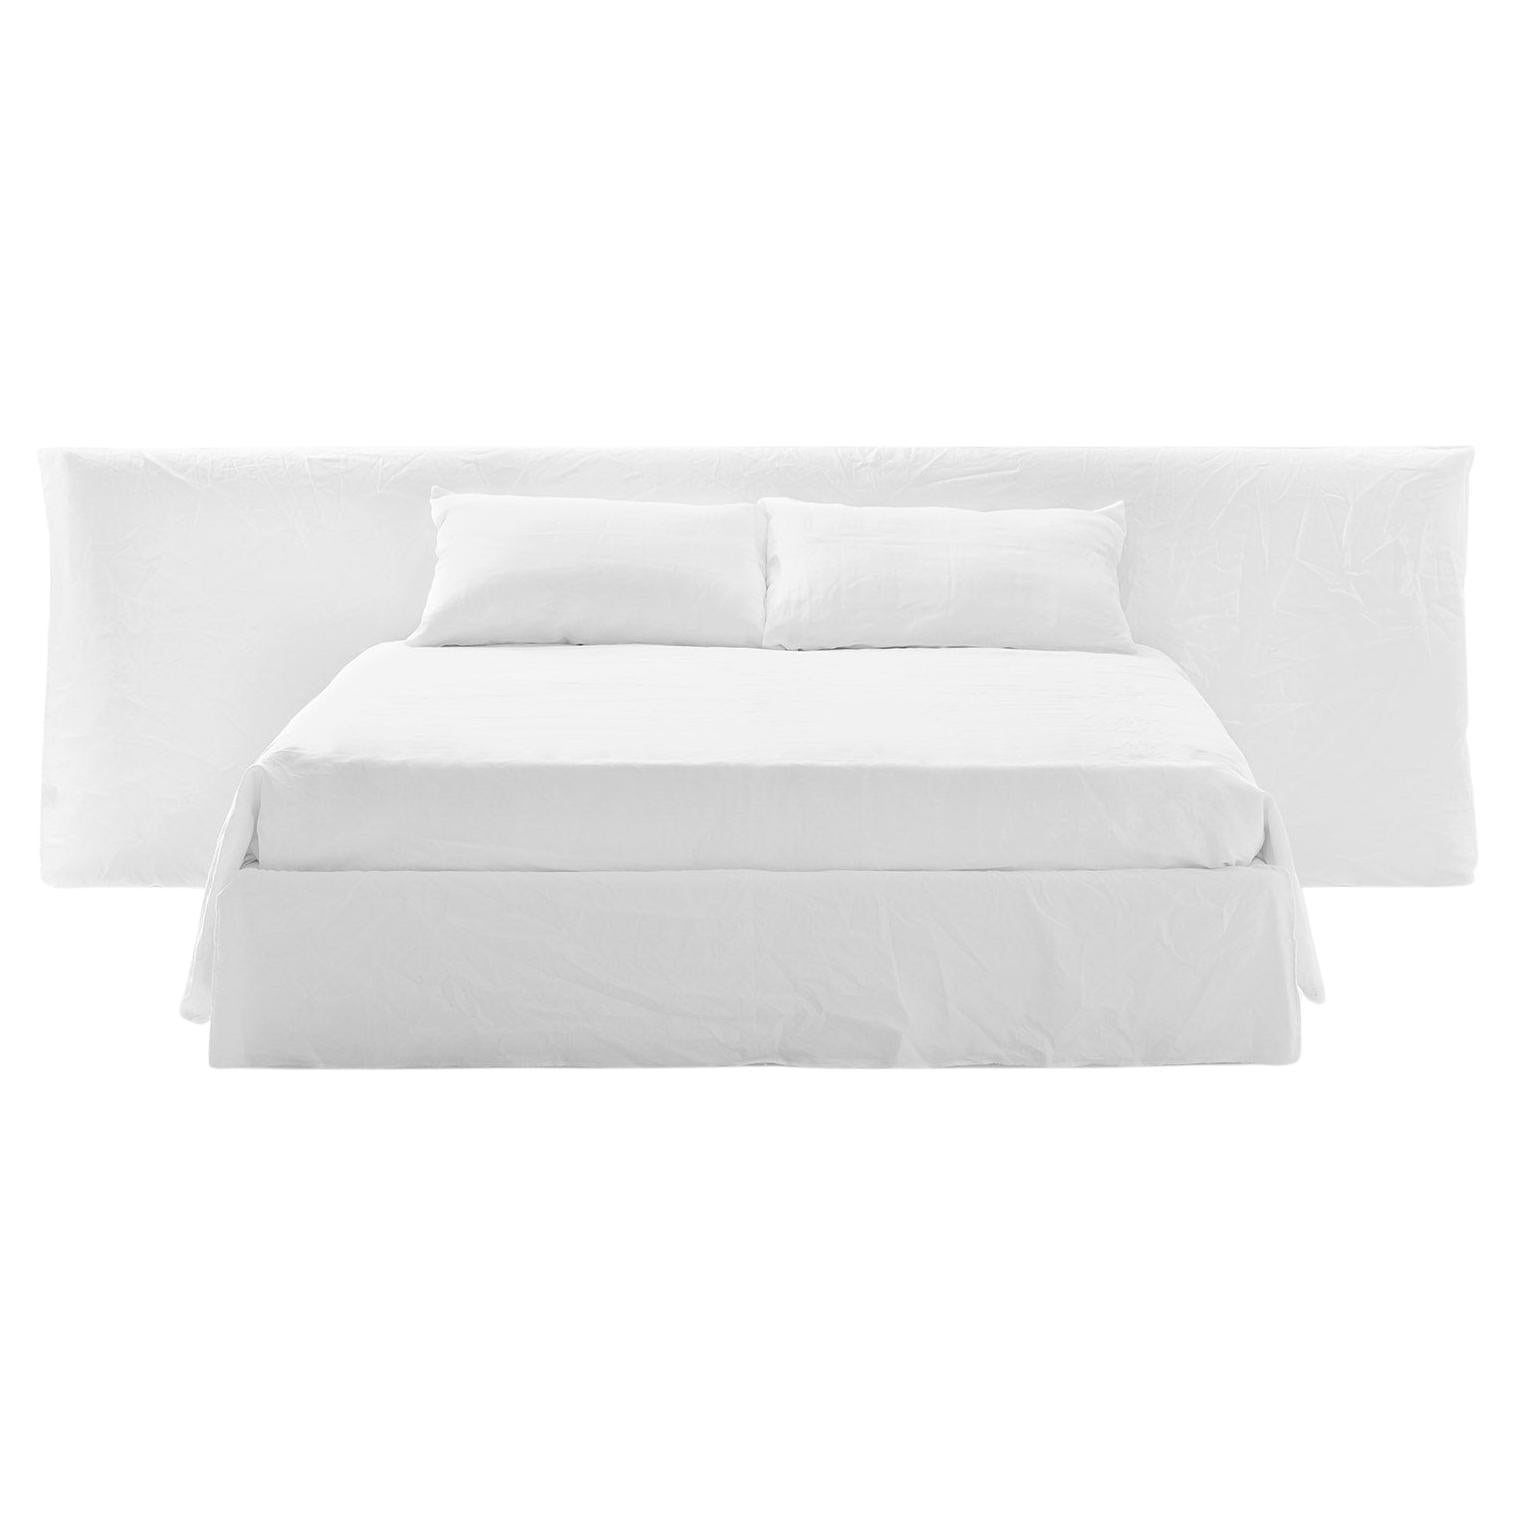 Gervasoni Ghost 81 Queen Knock Down Bed in White Linen Upholstery, Paola Navone For Sale